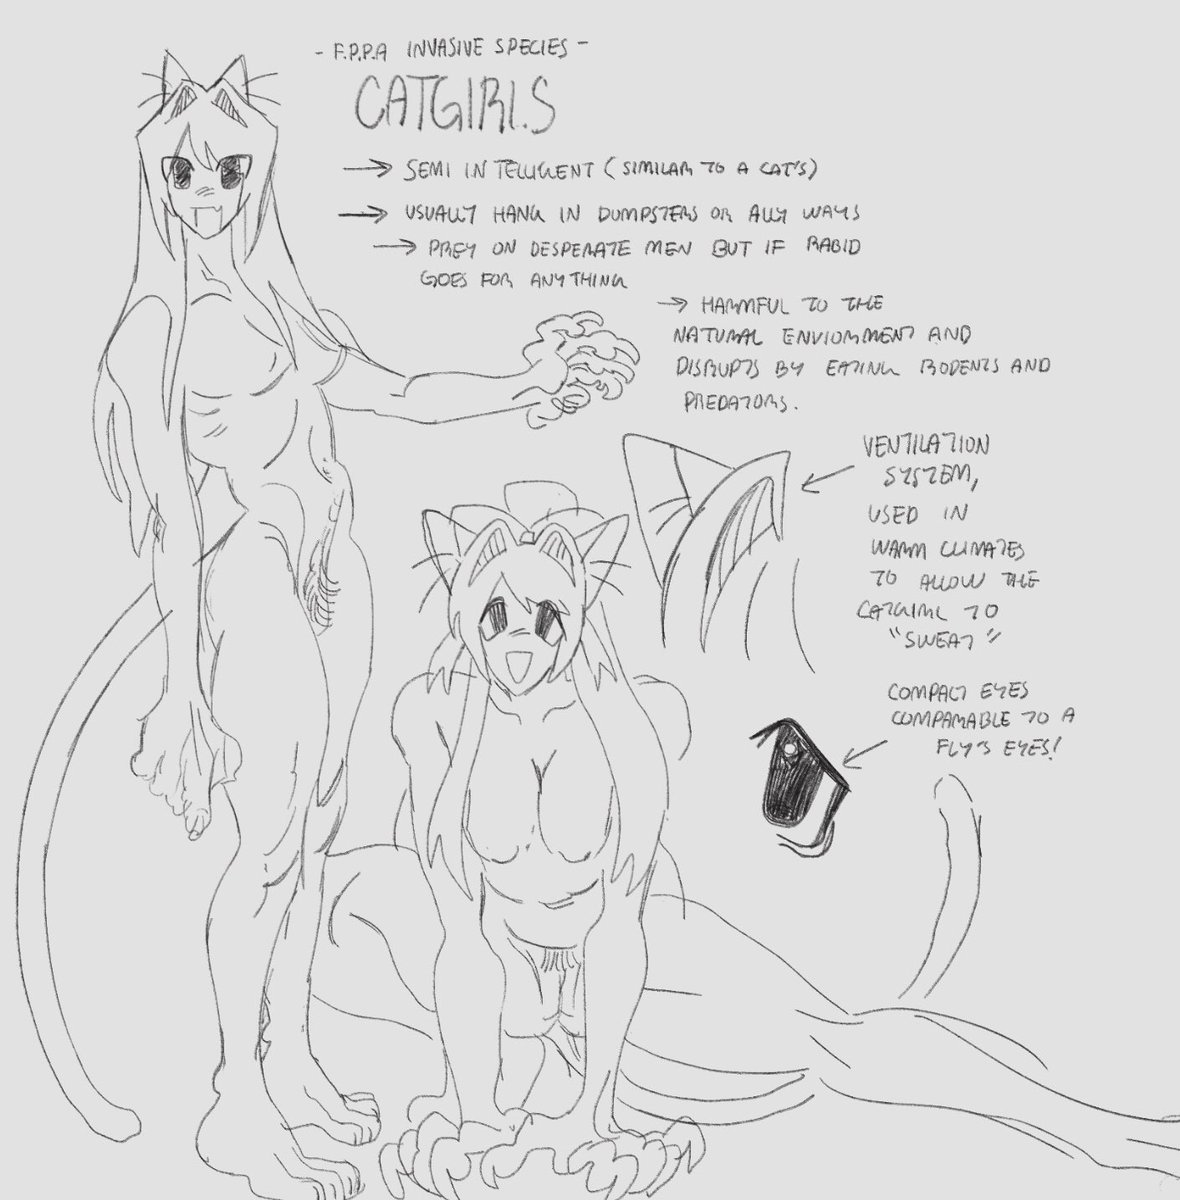 Catgirl monster concept! They're an invasive species and are classified as "insects" and their exoskeletons resemble soft skin. Their "hair" is actually setae and is highly toxic (can cause hives and allergic reactions) 